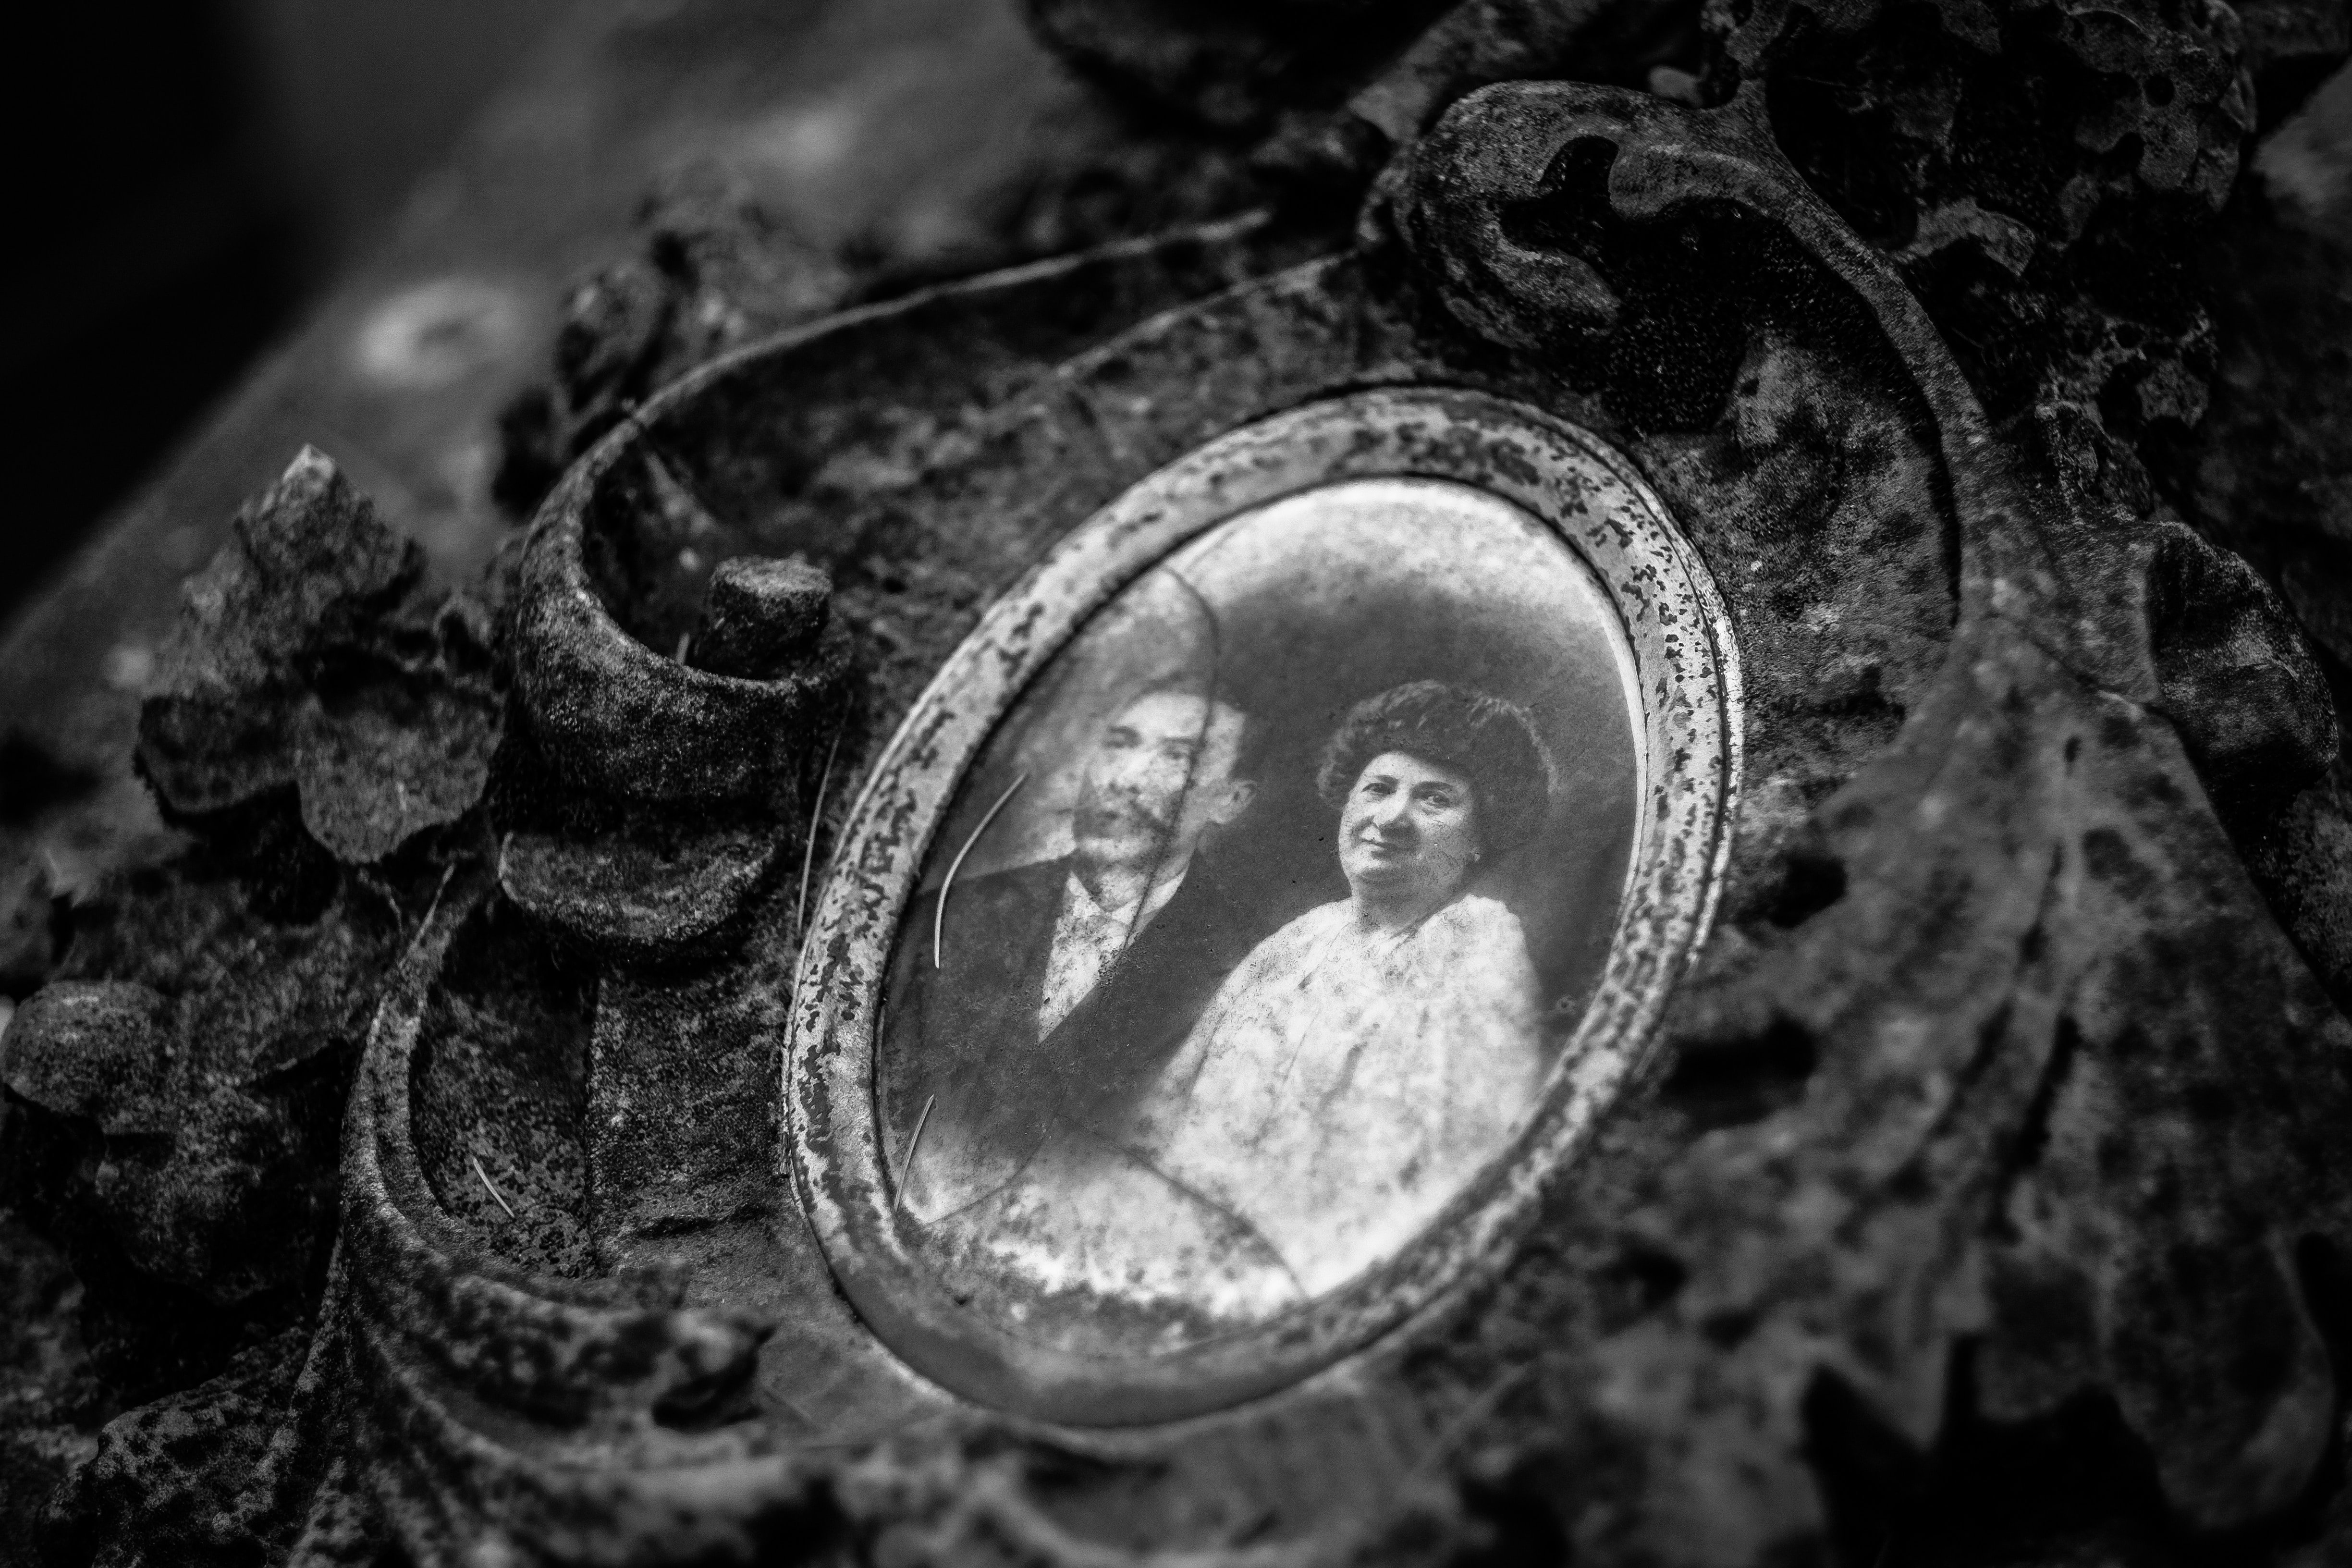 An old picture of a couple in a pendant | Source: Unsplash.com